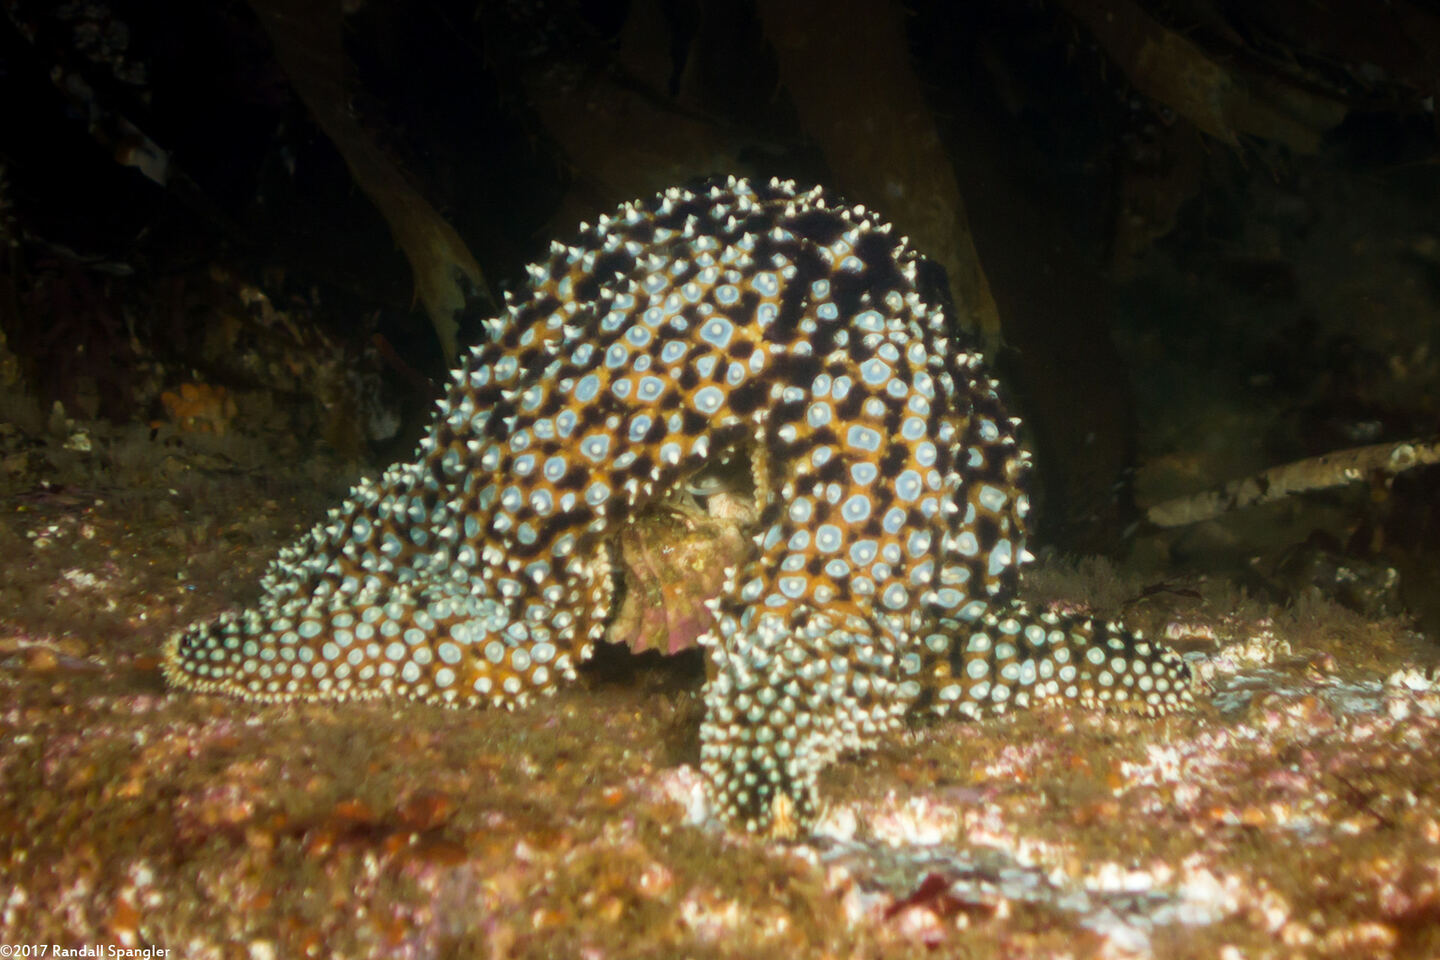 Pisaster giganteus (Giant Spined Star); Eating a leafy hornmouth snail